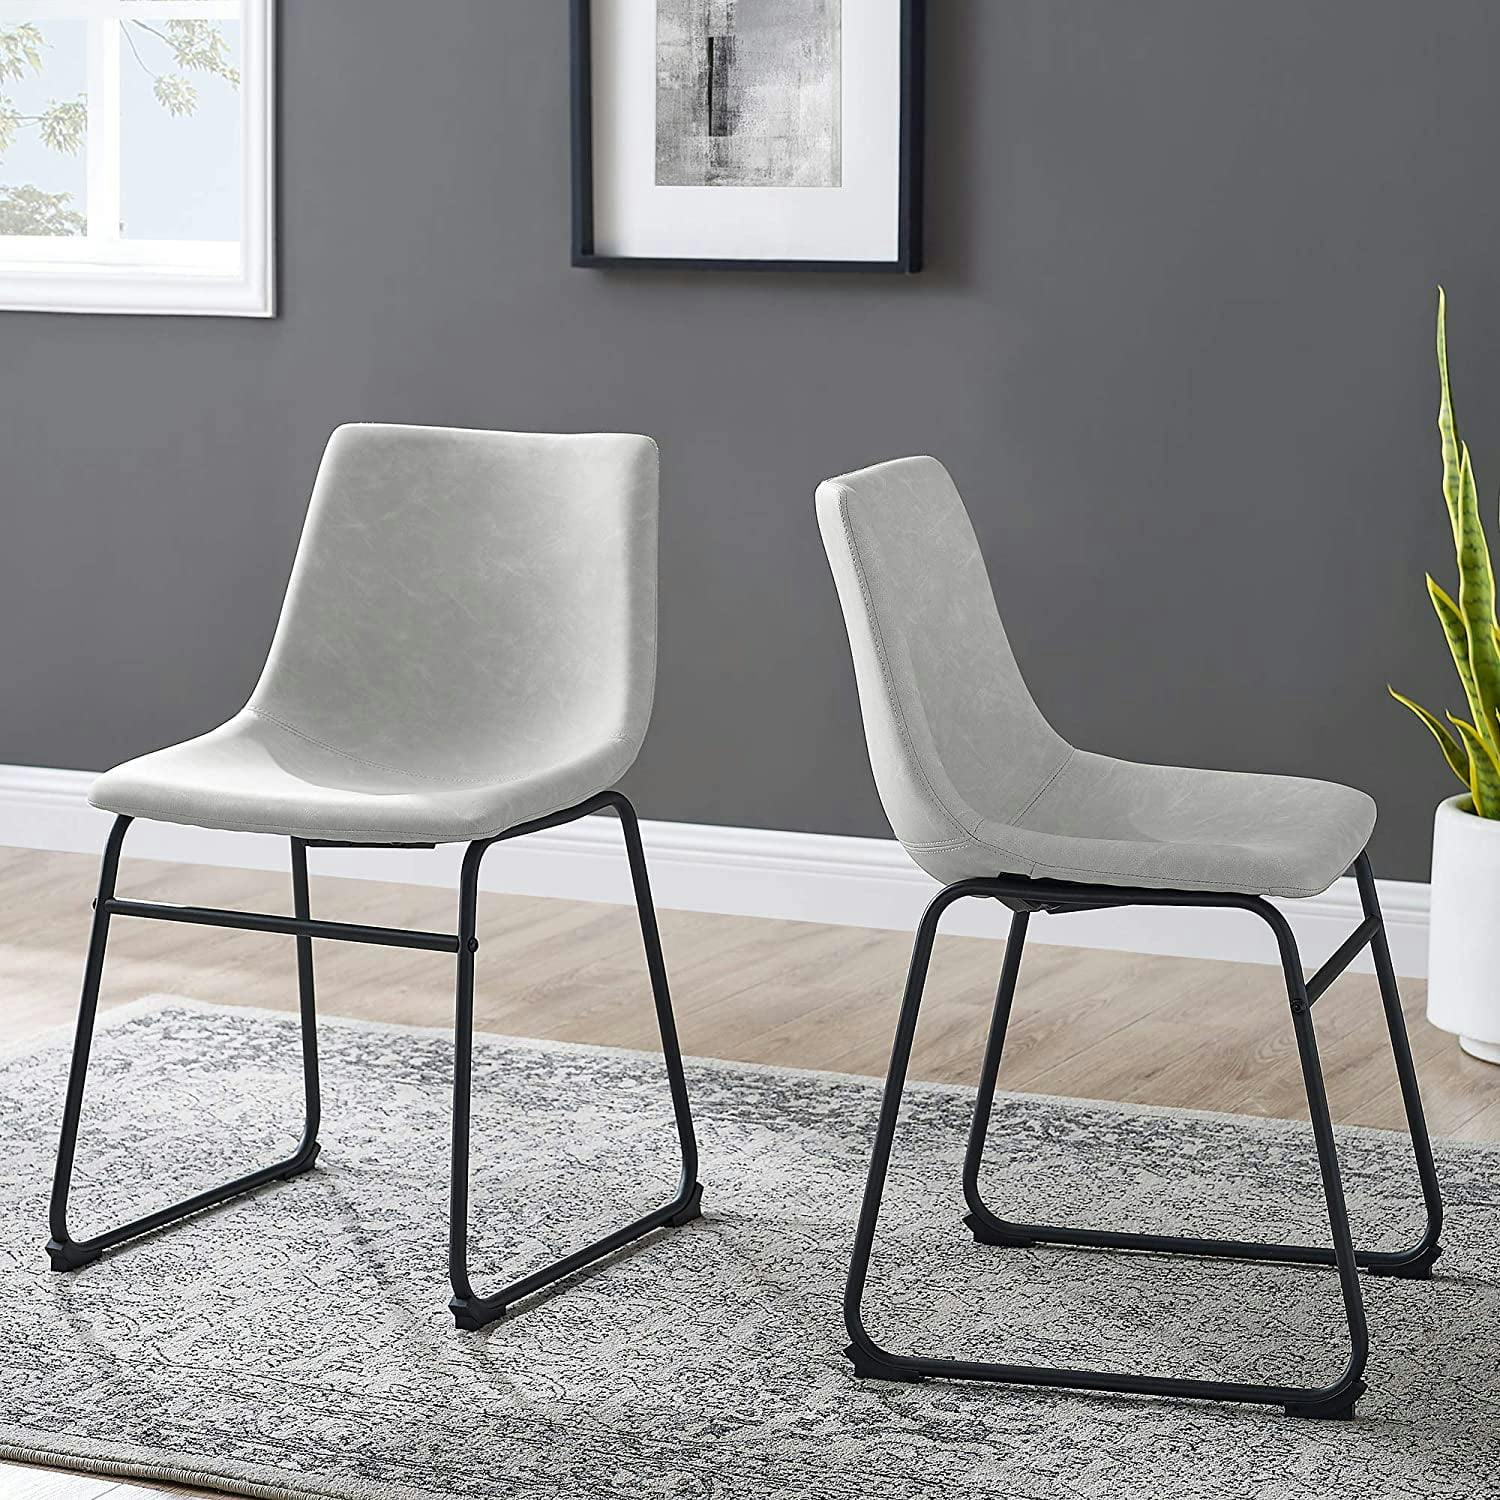 Dayton Urban Industrial Gray Faux Leather Dining Chair, Set of 2